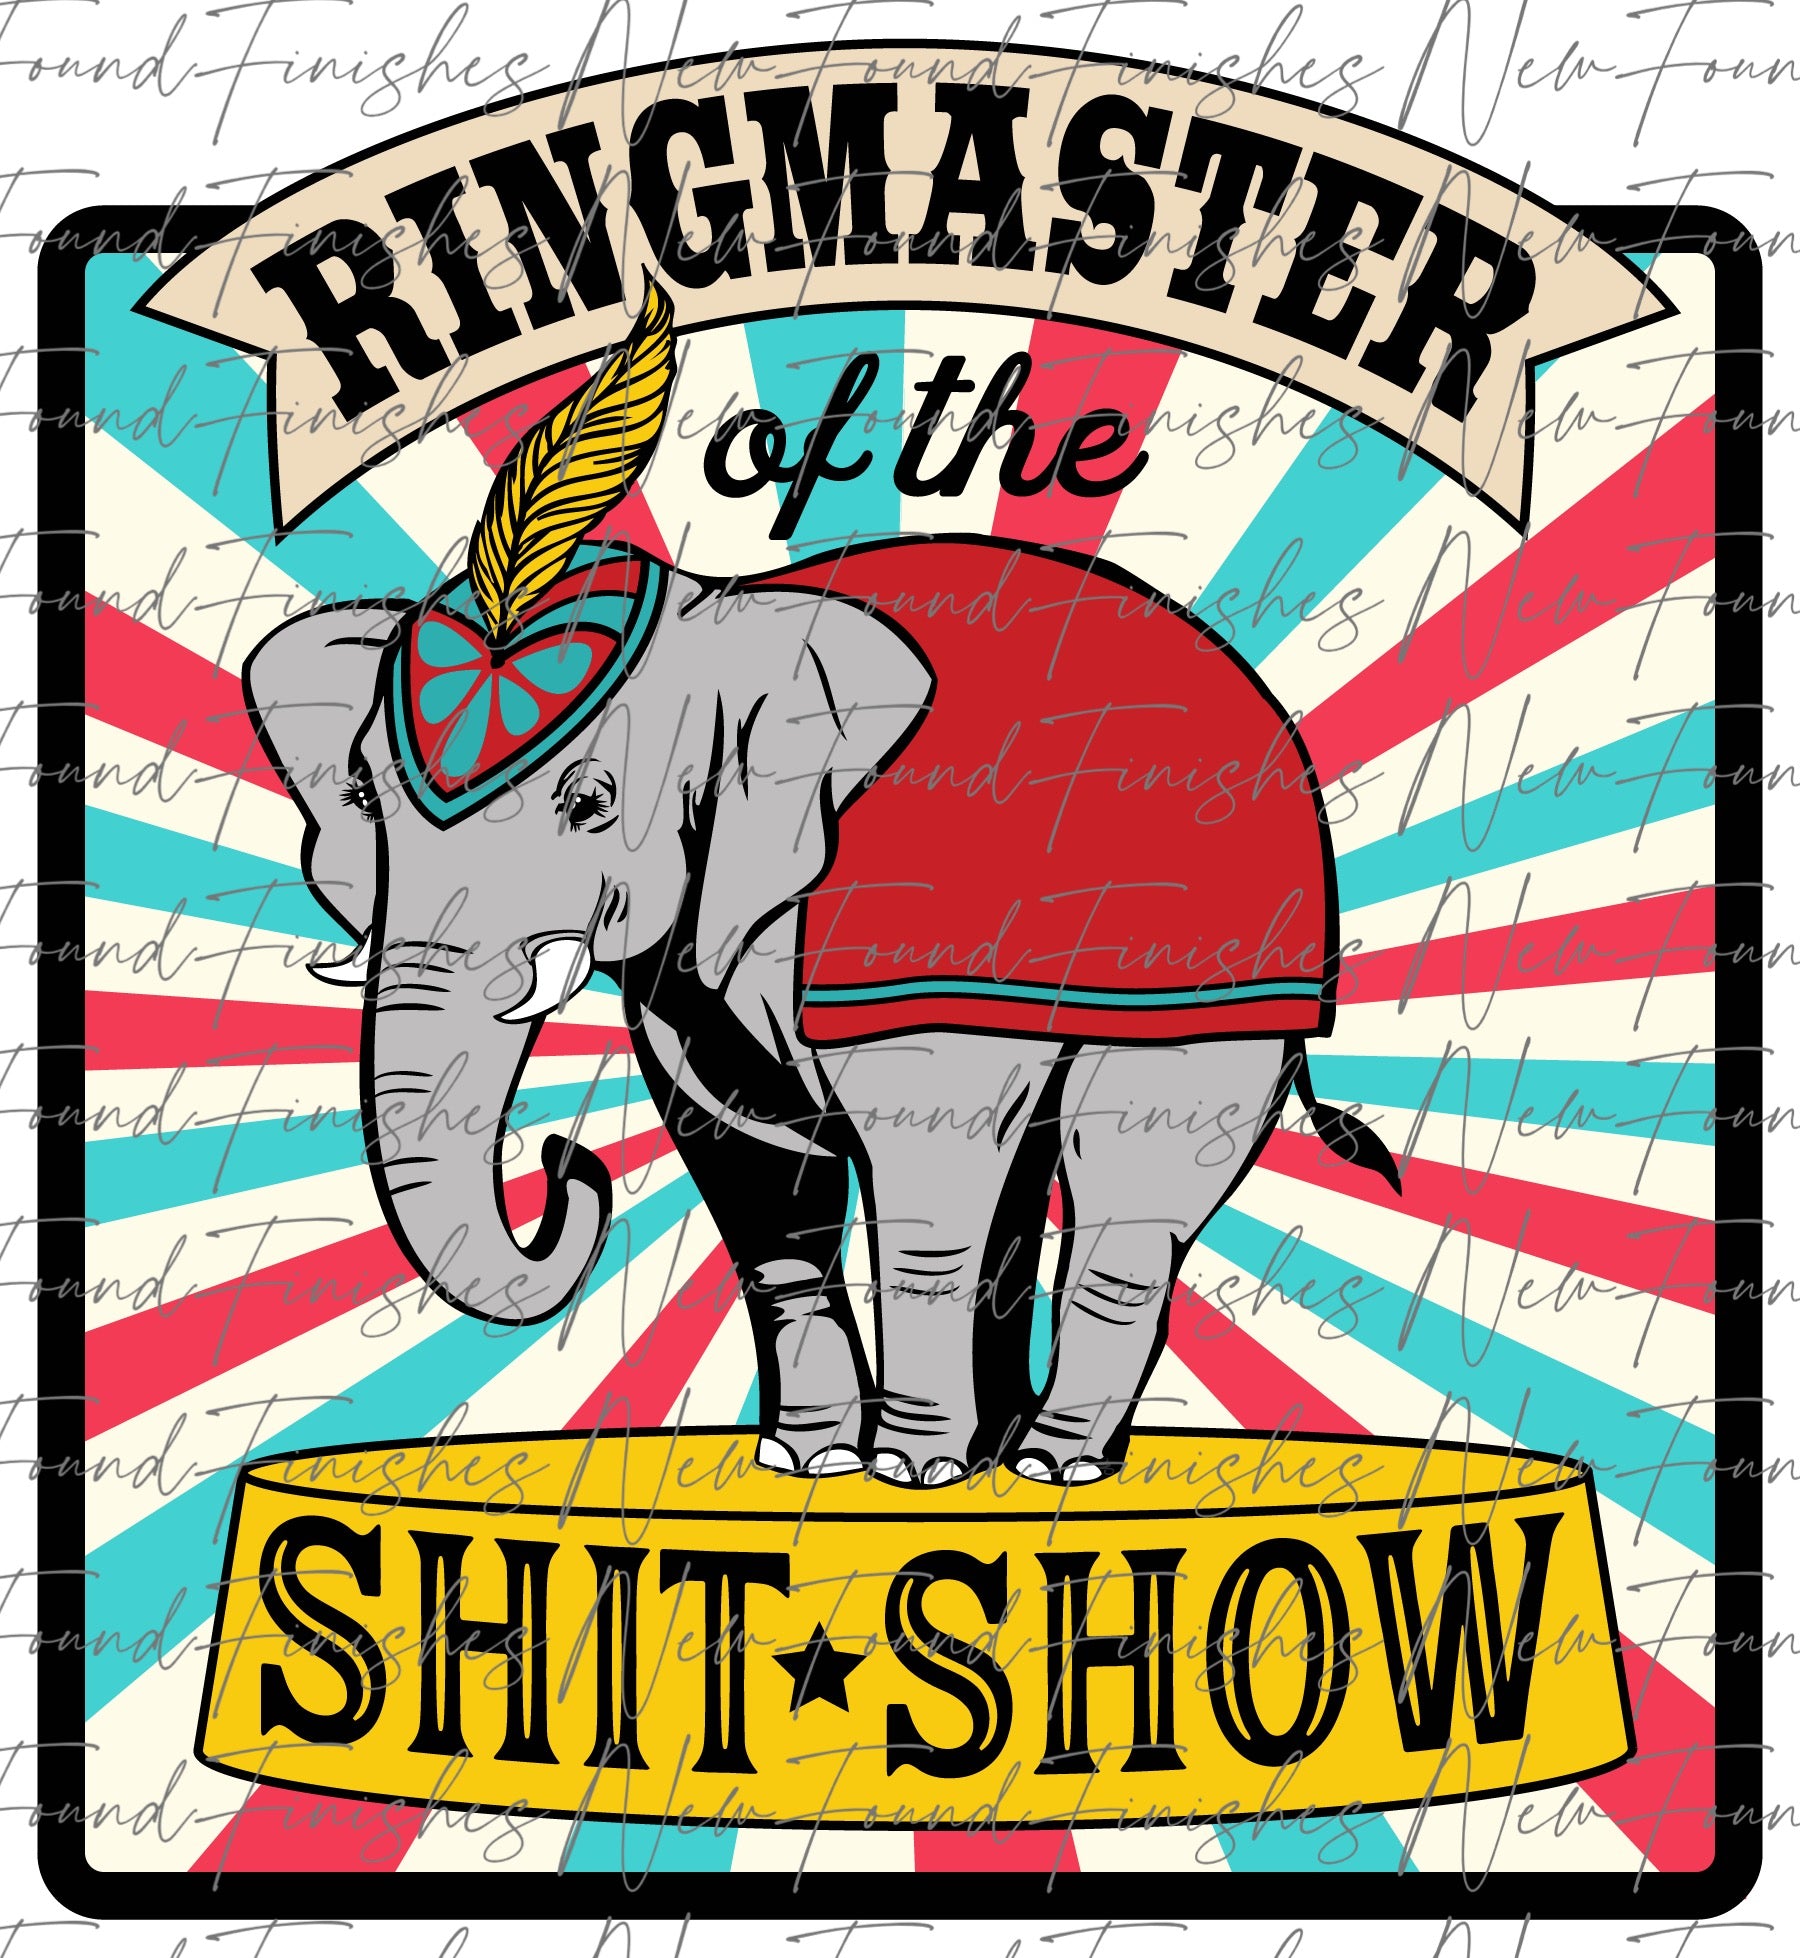 Ringmaster of the shitshow